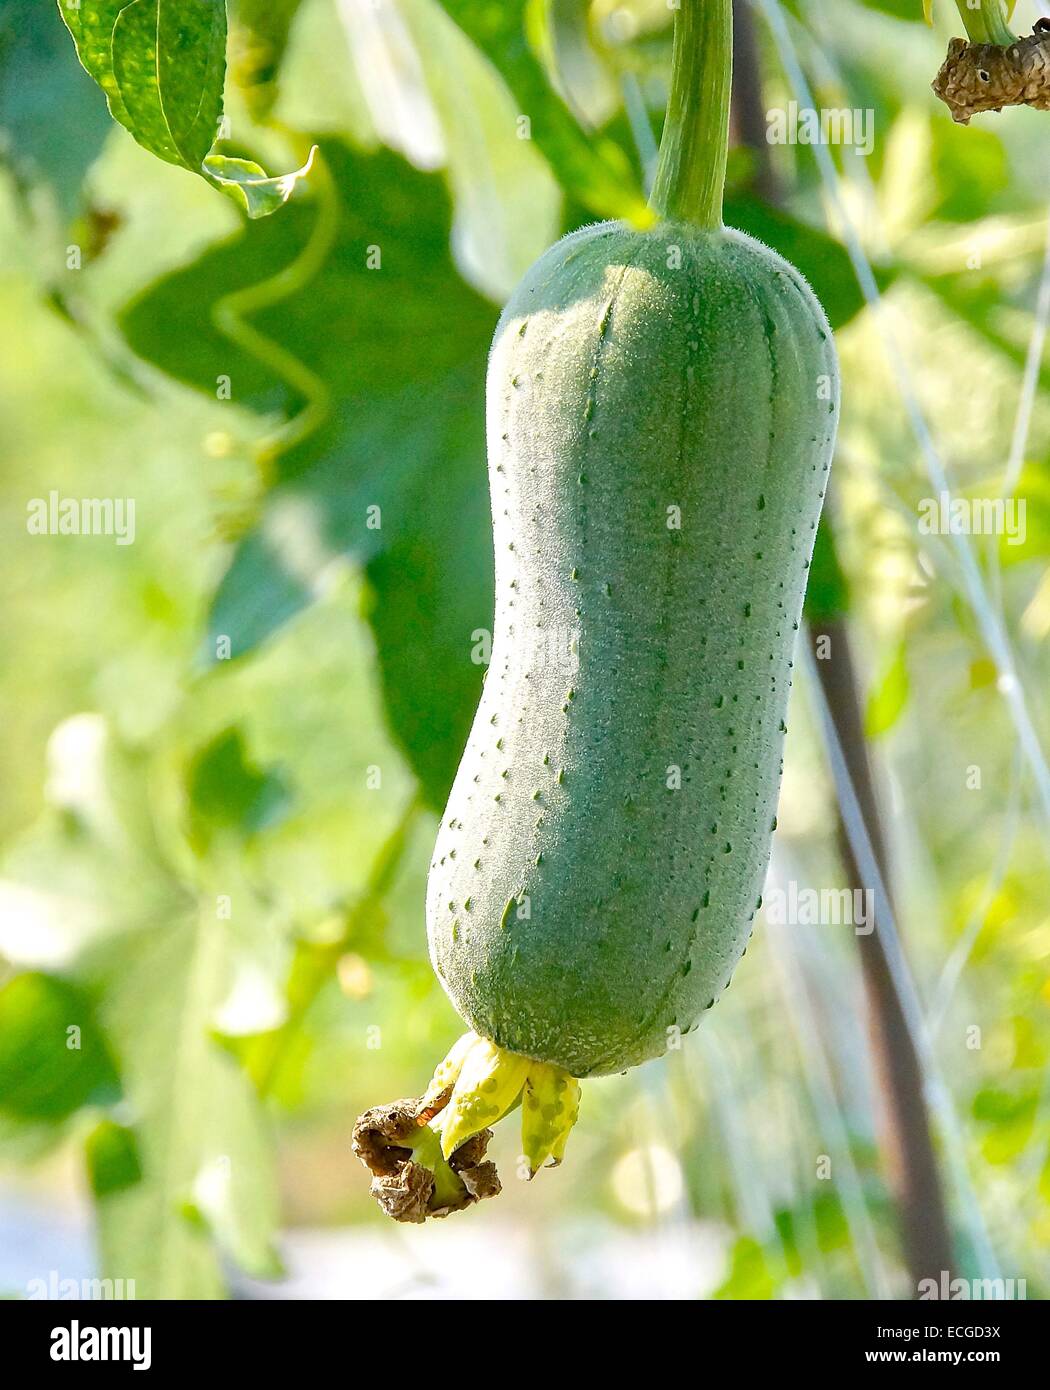 The close view of loofah gourd closeup Stock Photo